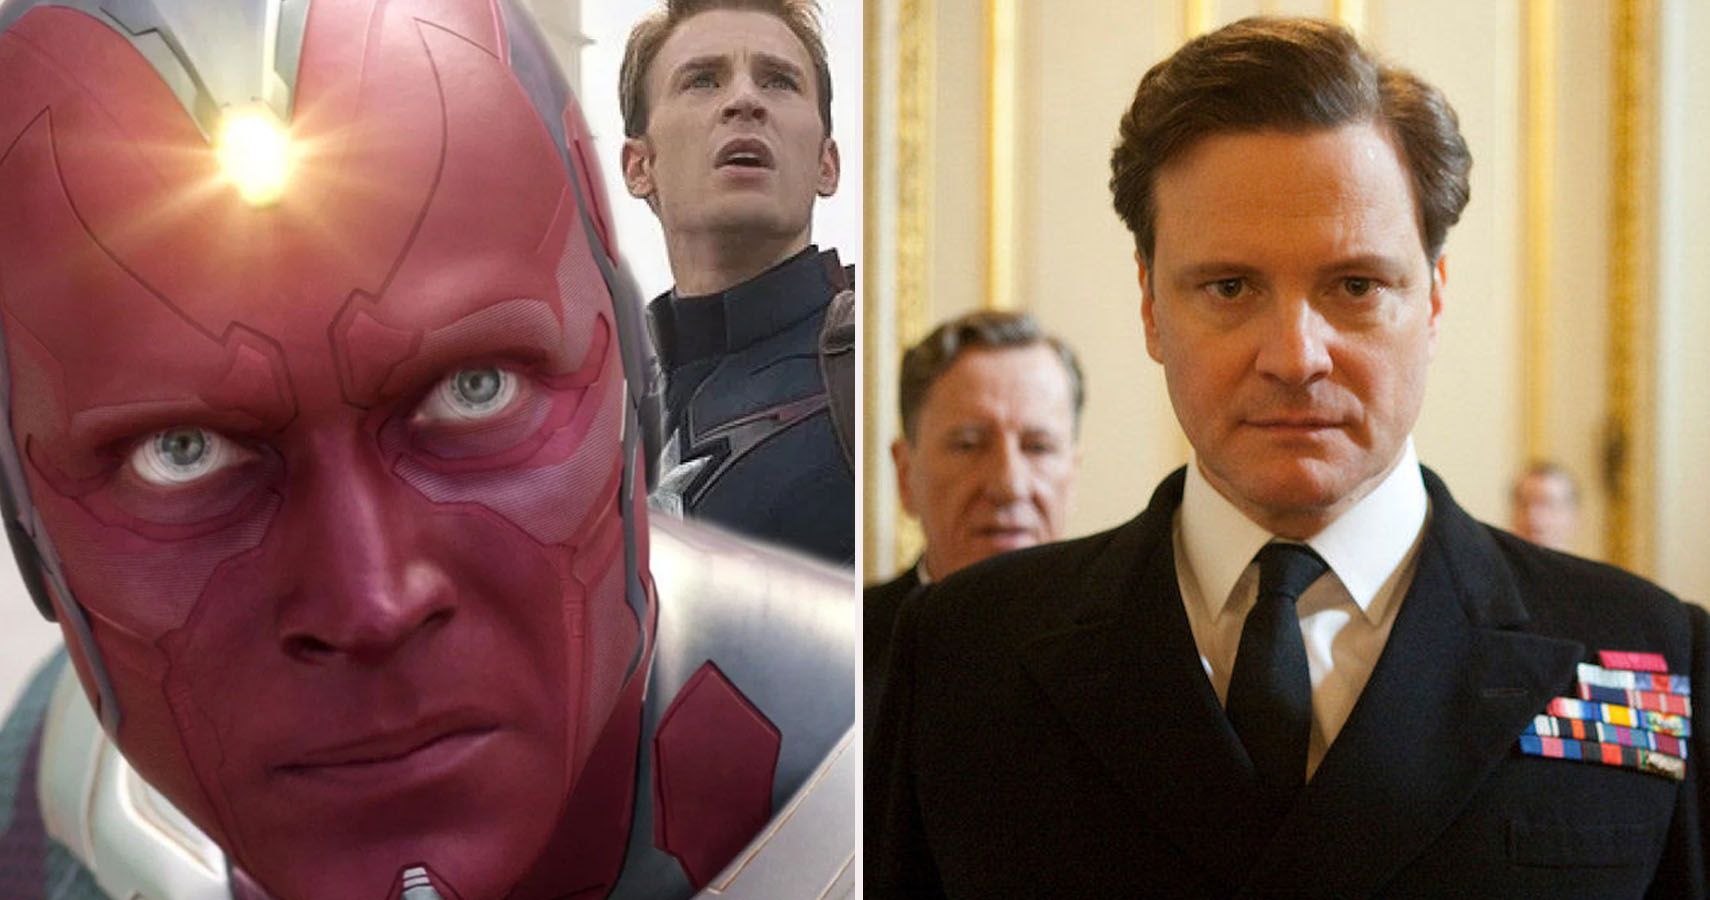 Split image: Paul Bettany as Vision next to Colin Firth as King George VI